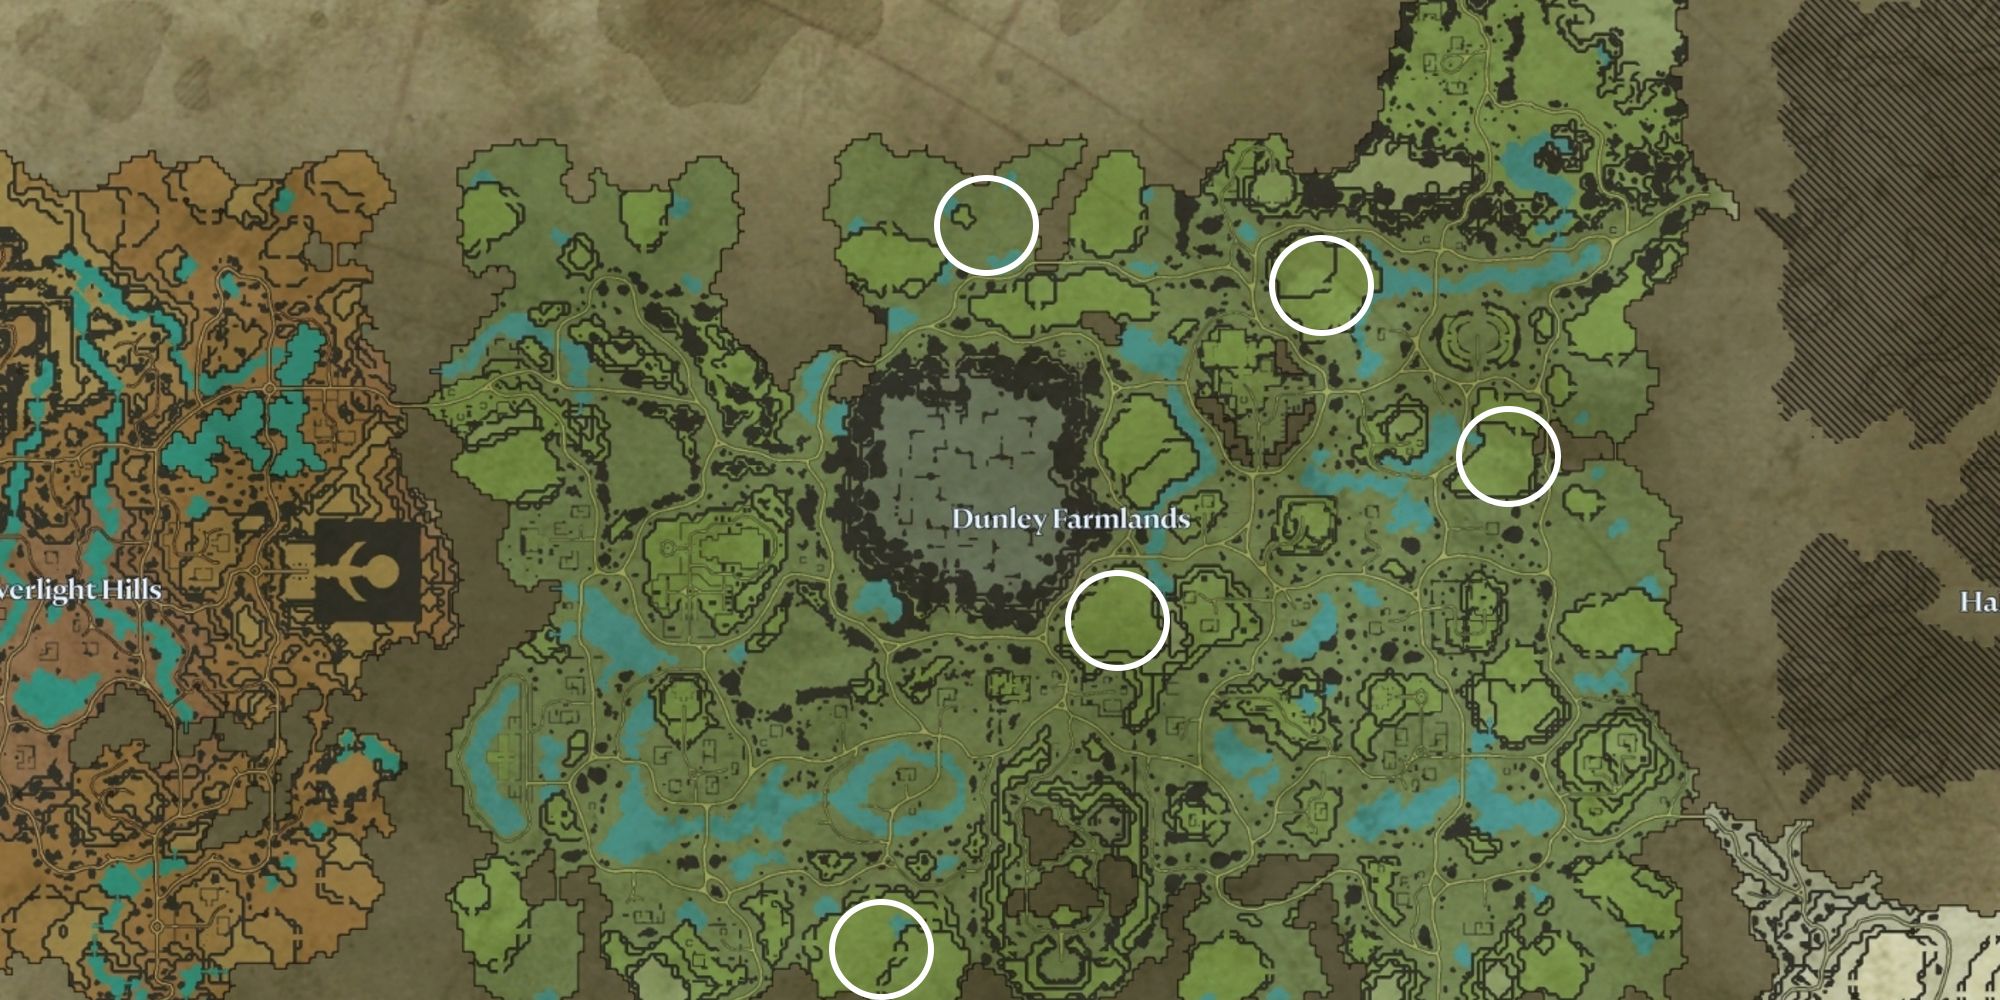 map of dunley farmlands with potential castle build locations circled